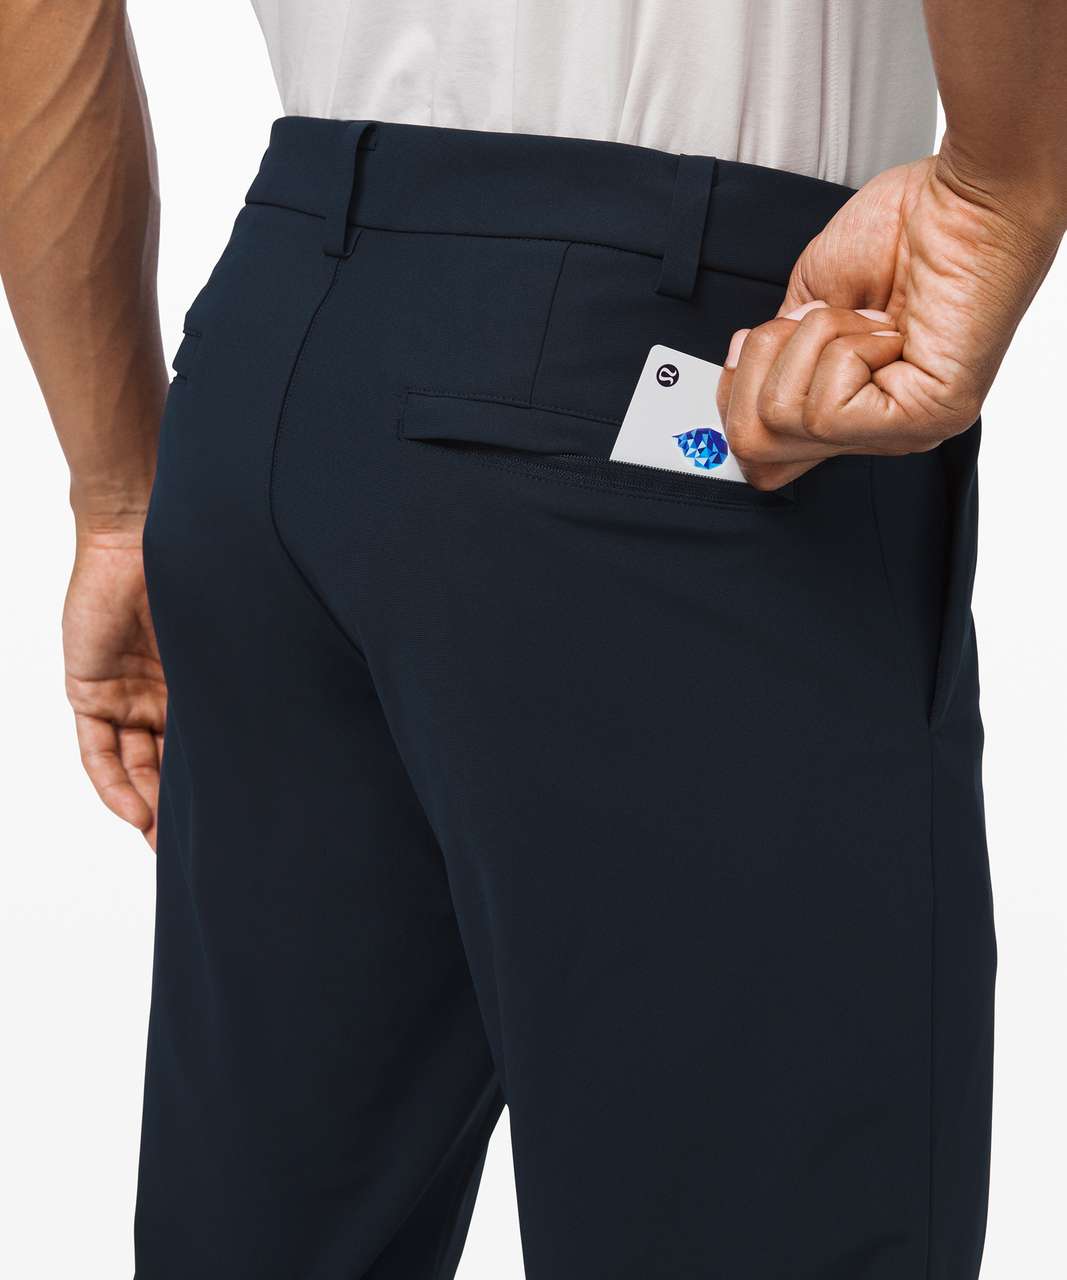 Lululemon Commission Pant Classic *Warpstreme 30" - True Navy (First Release)